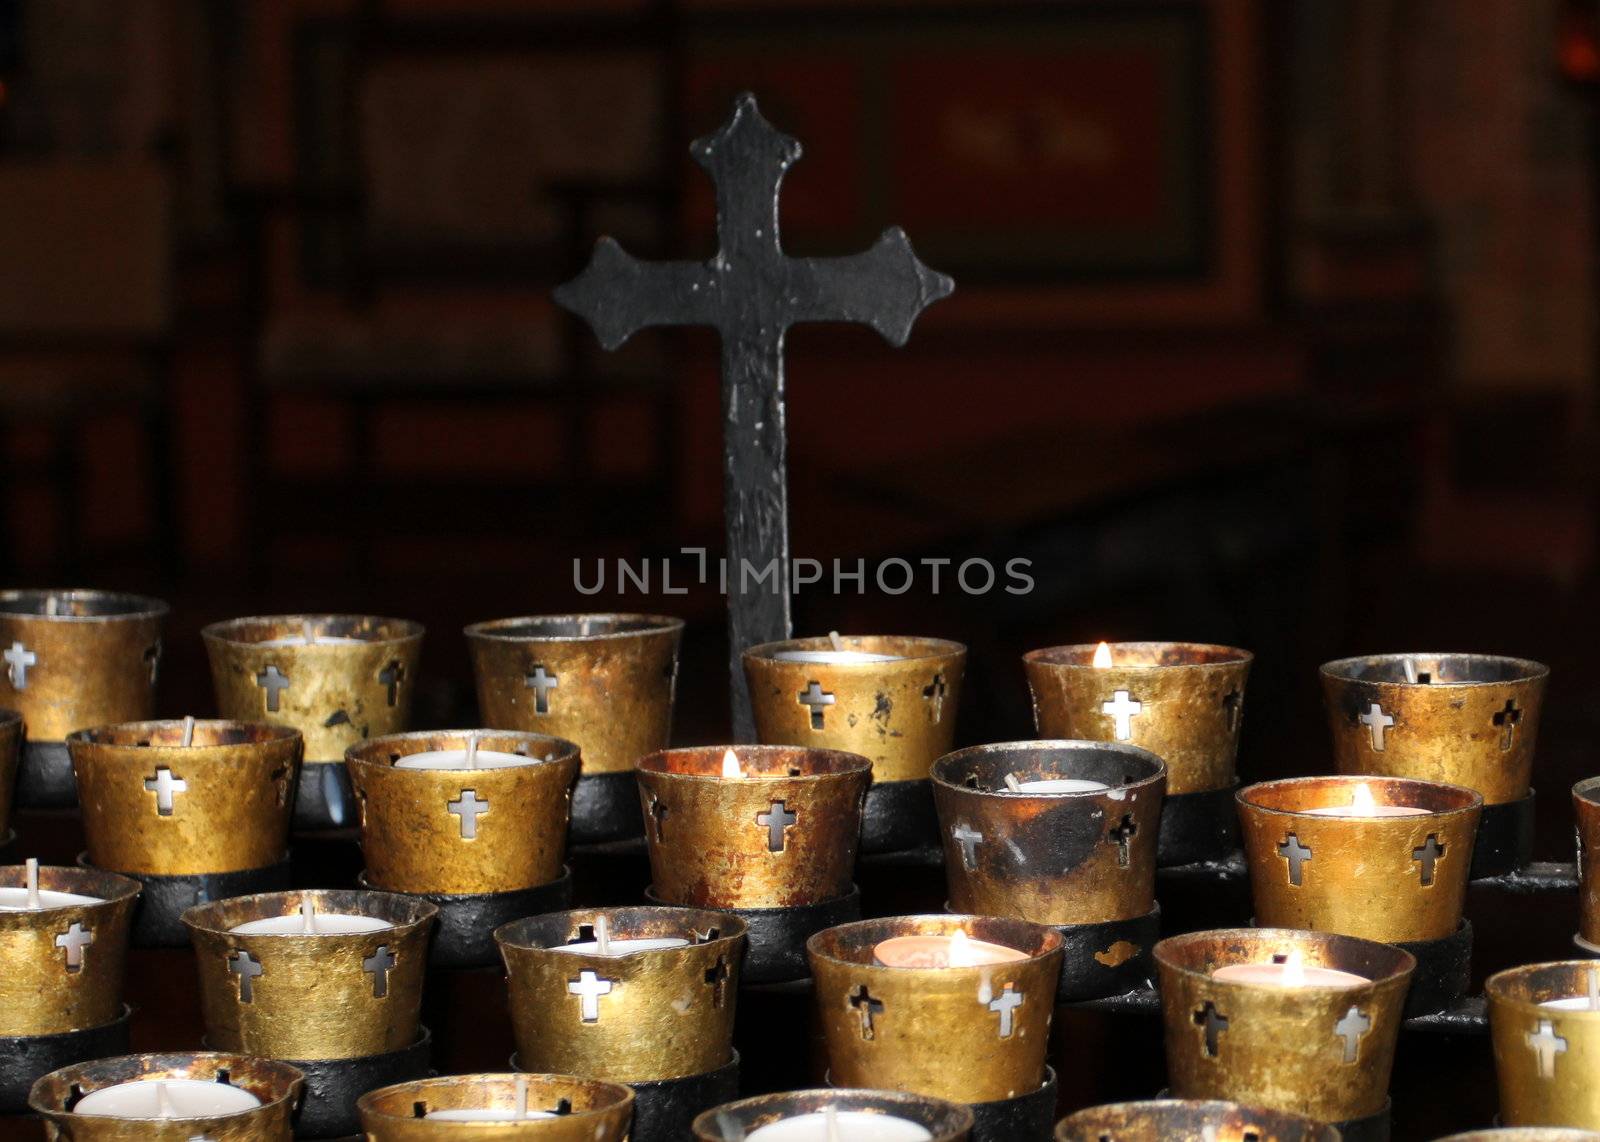 Candles in a church on black background with a cross.